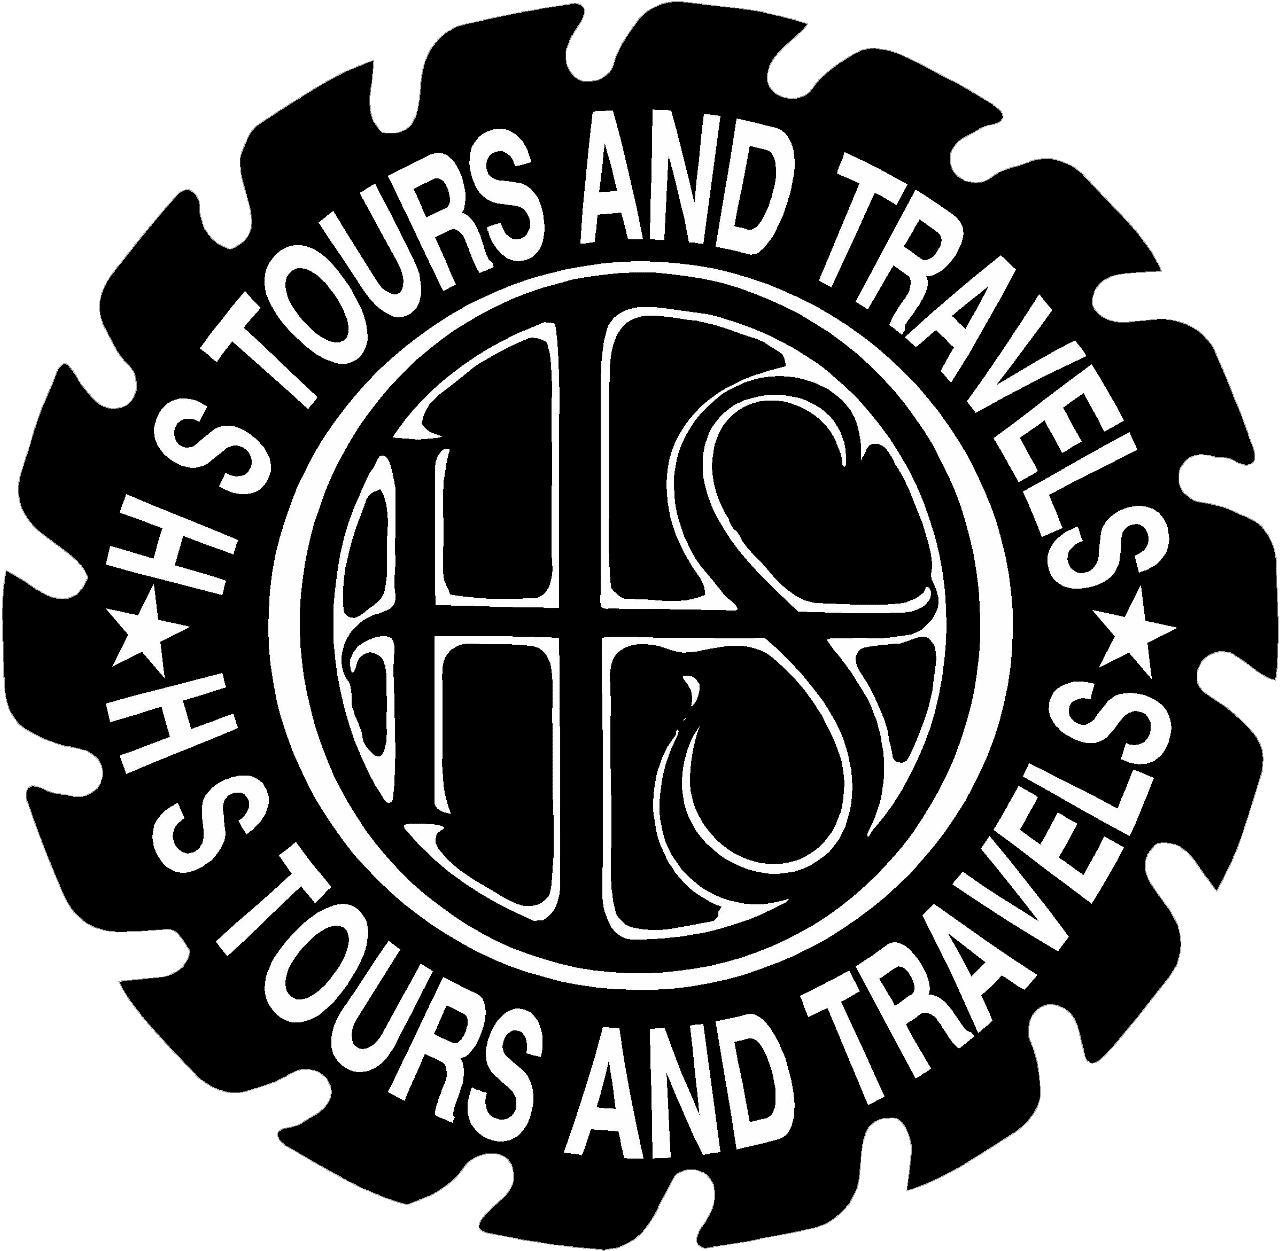 HS Tours And Travels